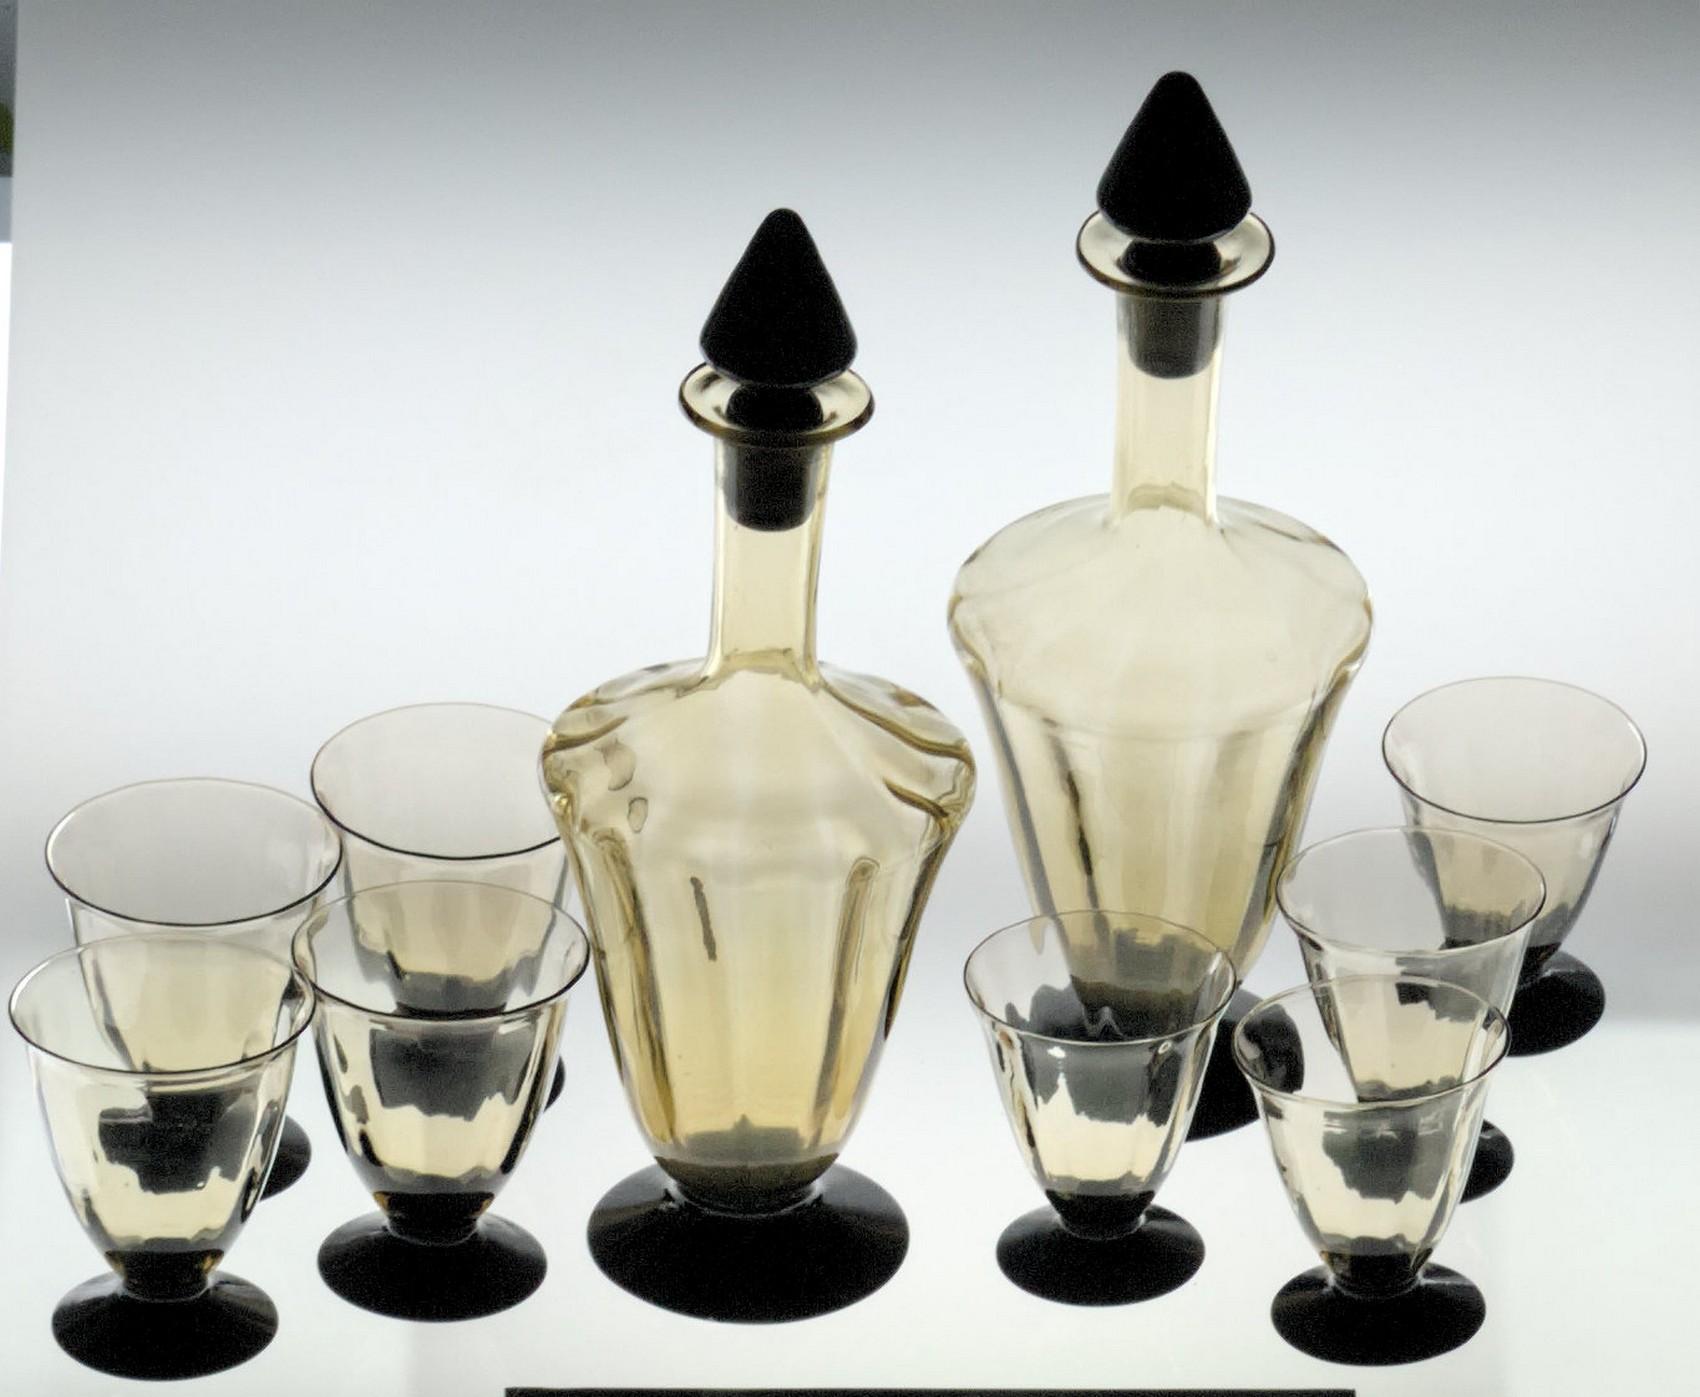 A port or cherry set made of two bottles (white and red) with stopper. Body is in fume rigadin and black foot. 4 larger glass and 4 smaller glass. Probably in origin was a white and red wine set. 

Glass shows fume glass typical color variation